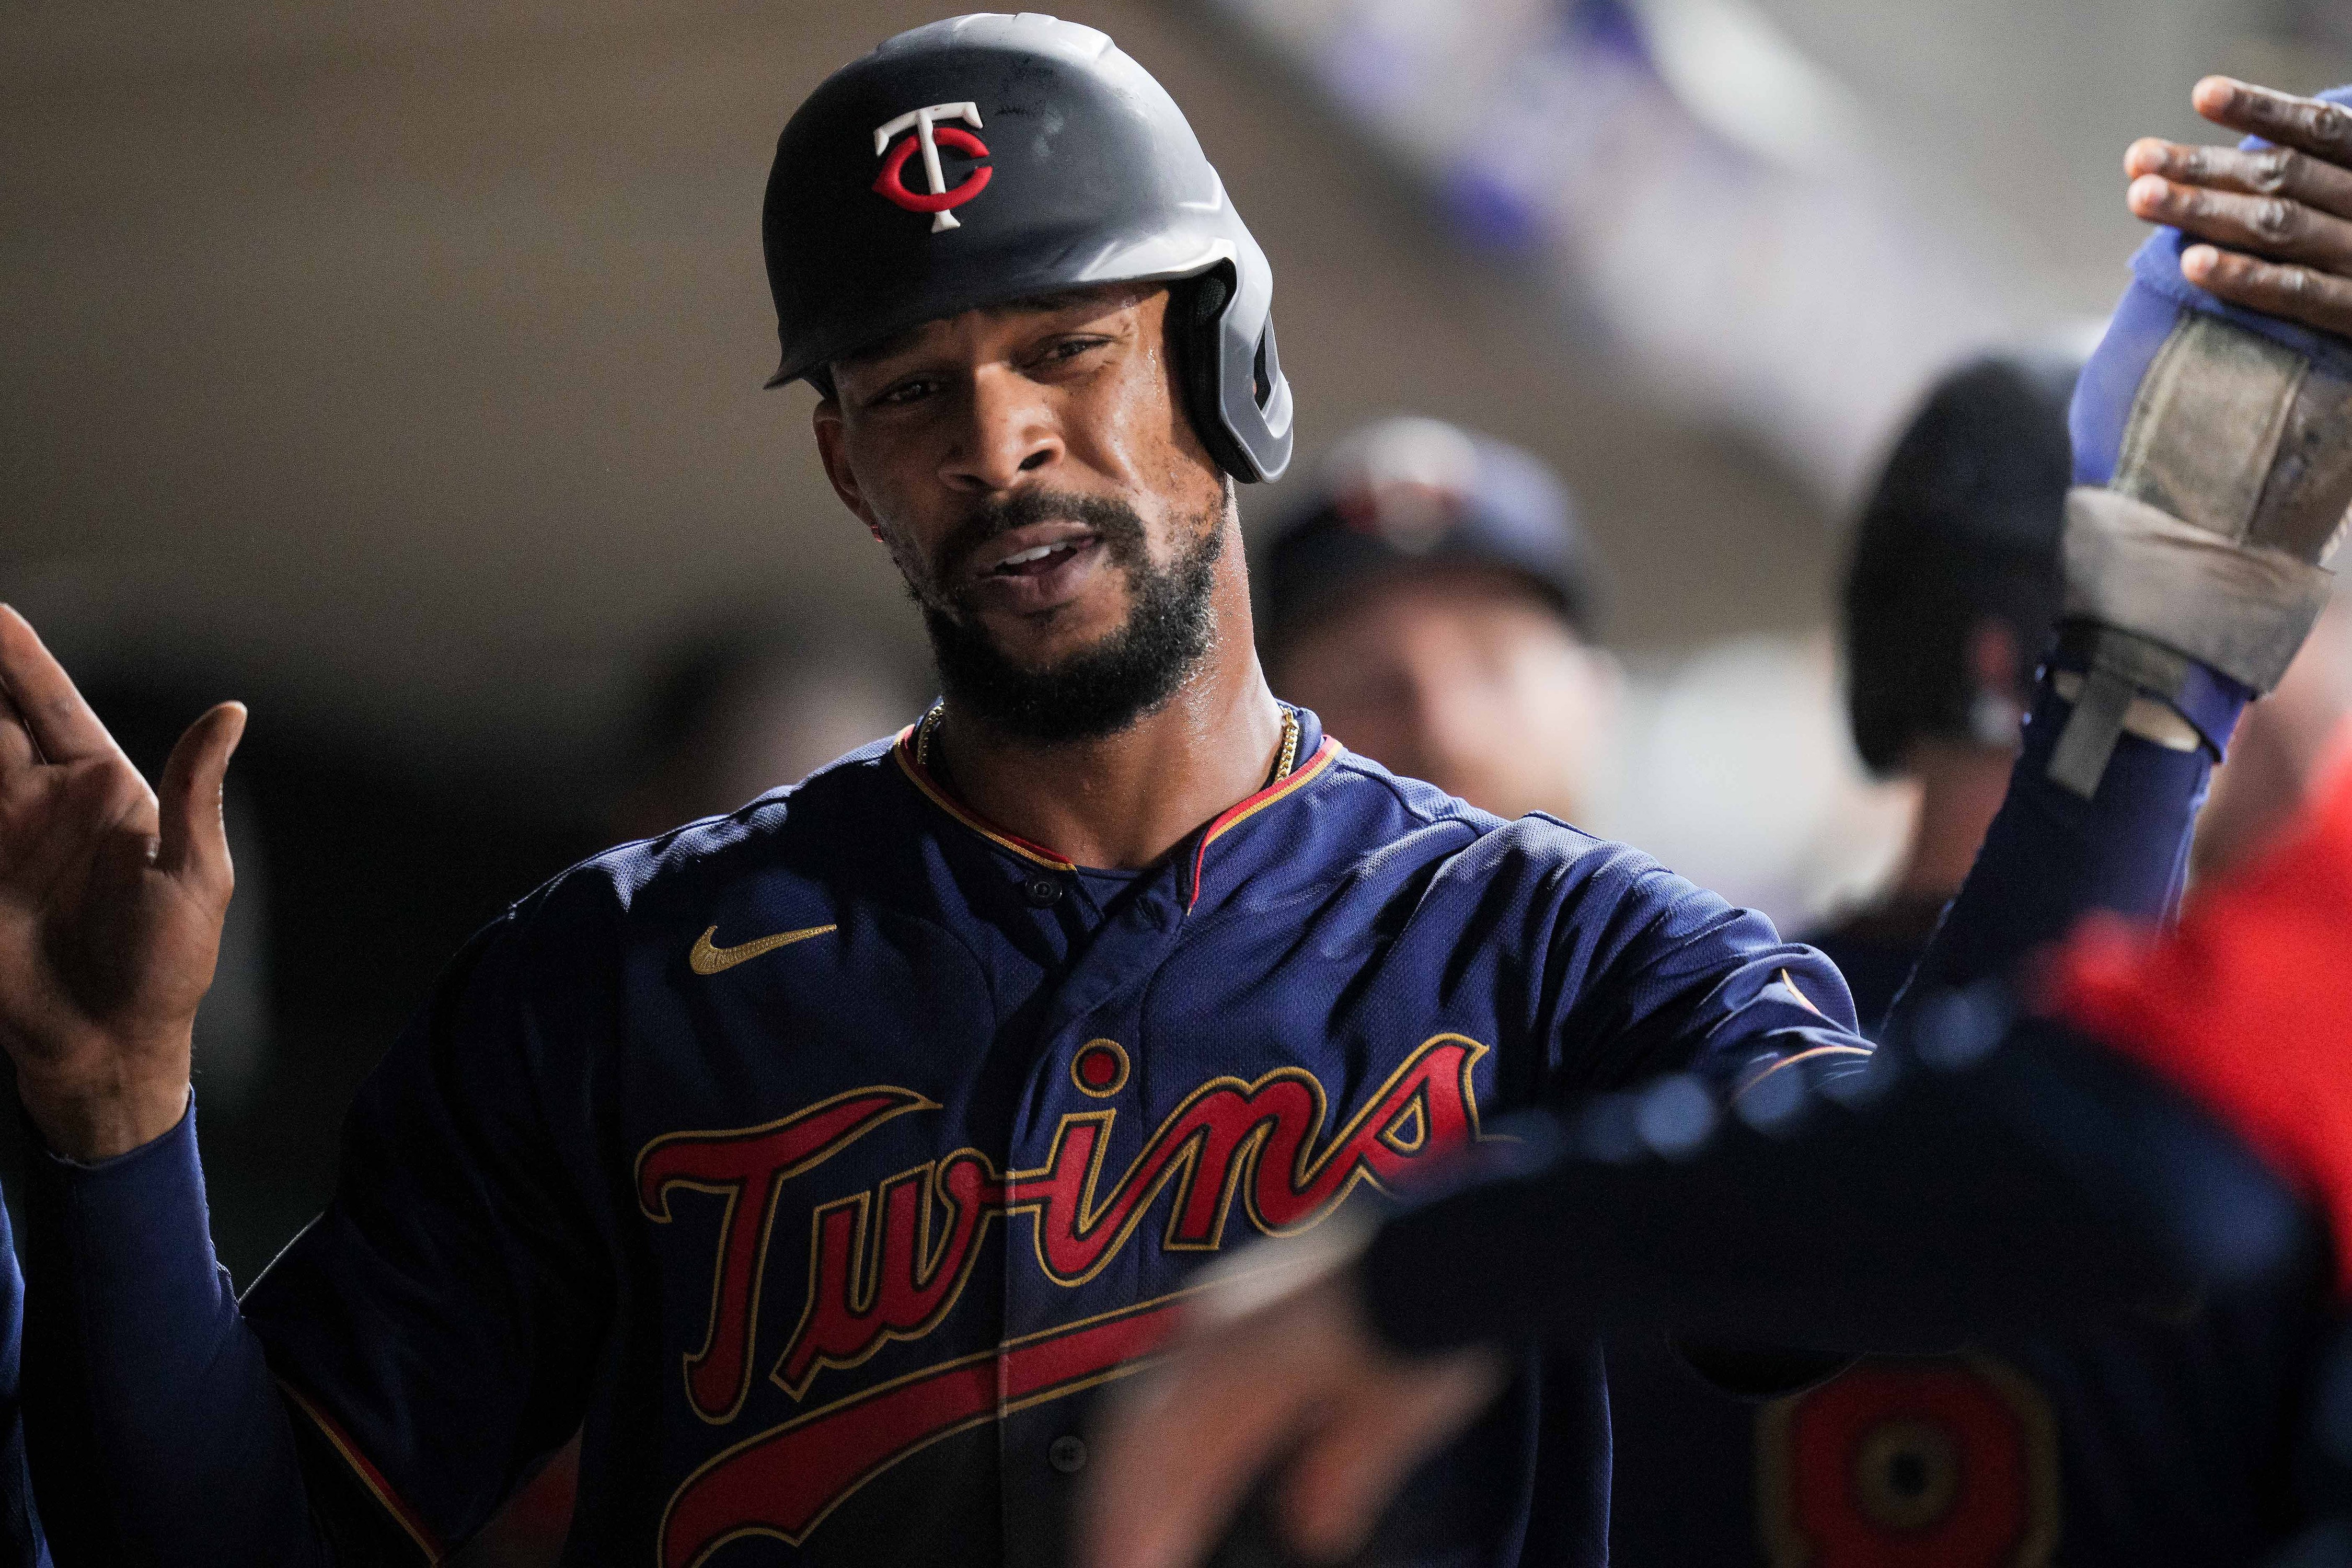 Byron Buxton is Apparently Signing a Long-Term Extension with the